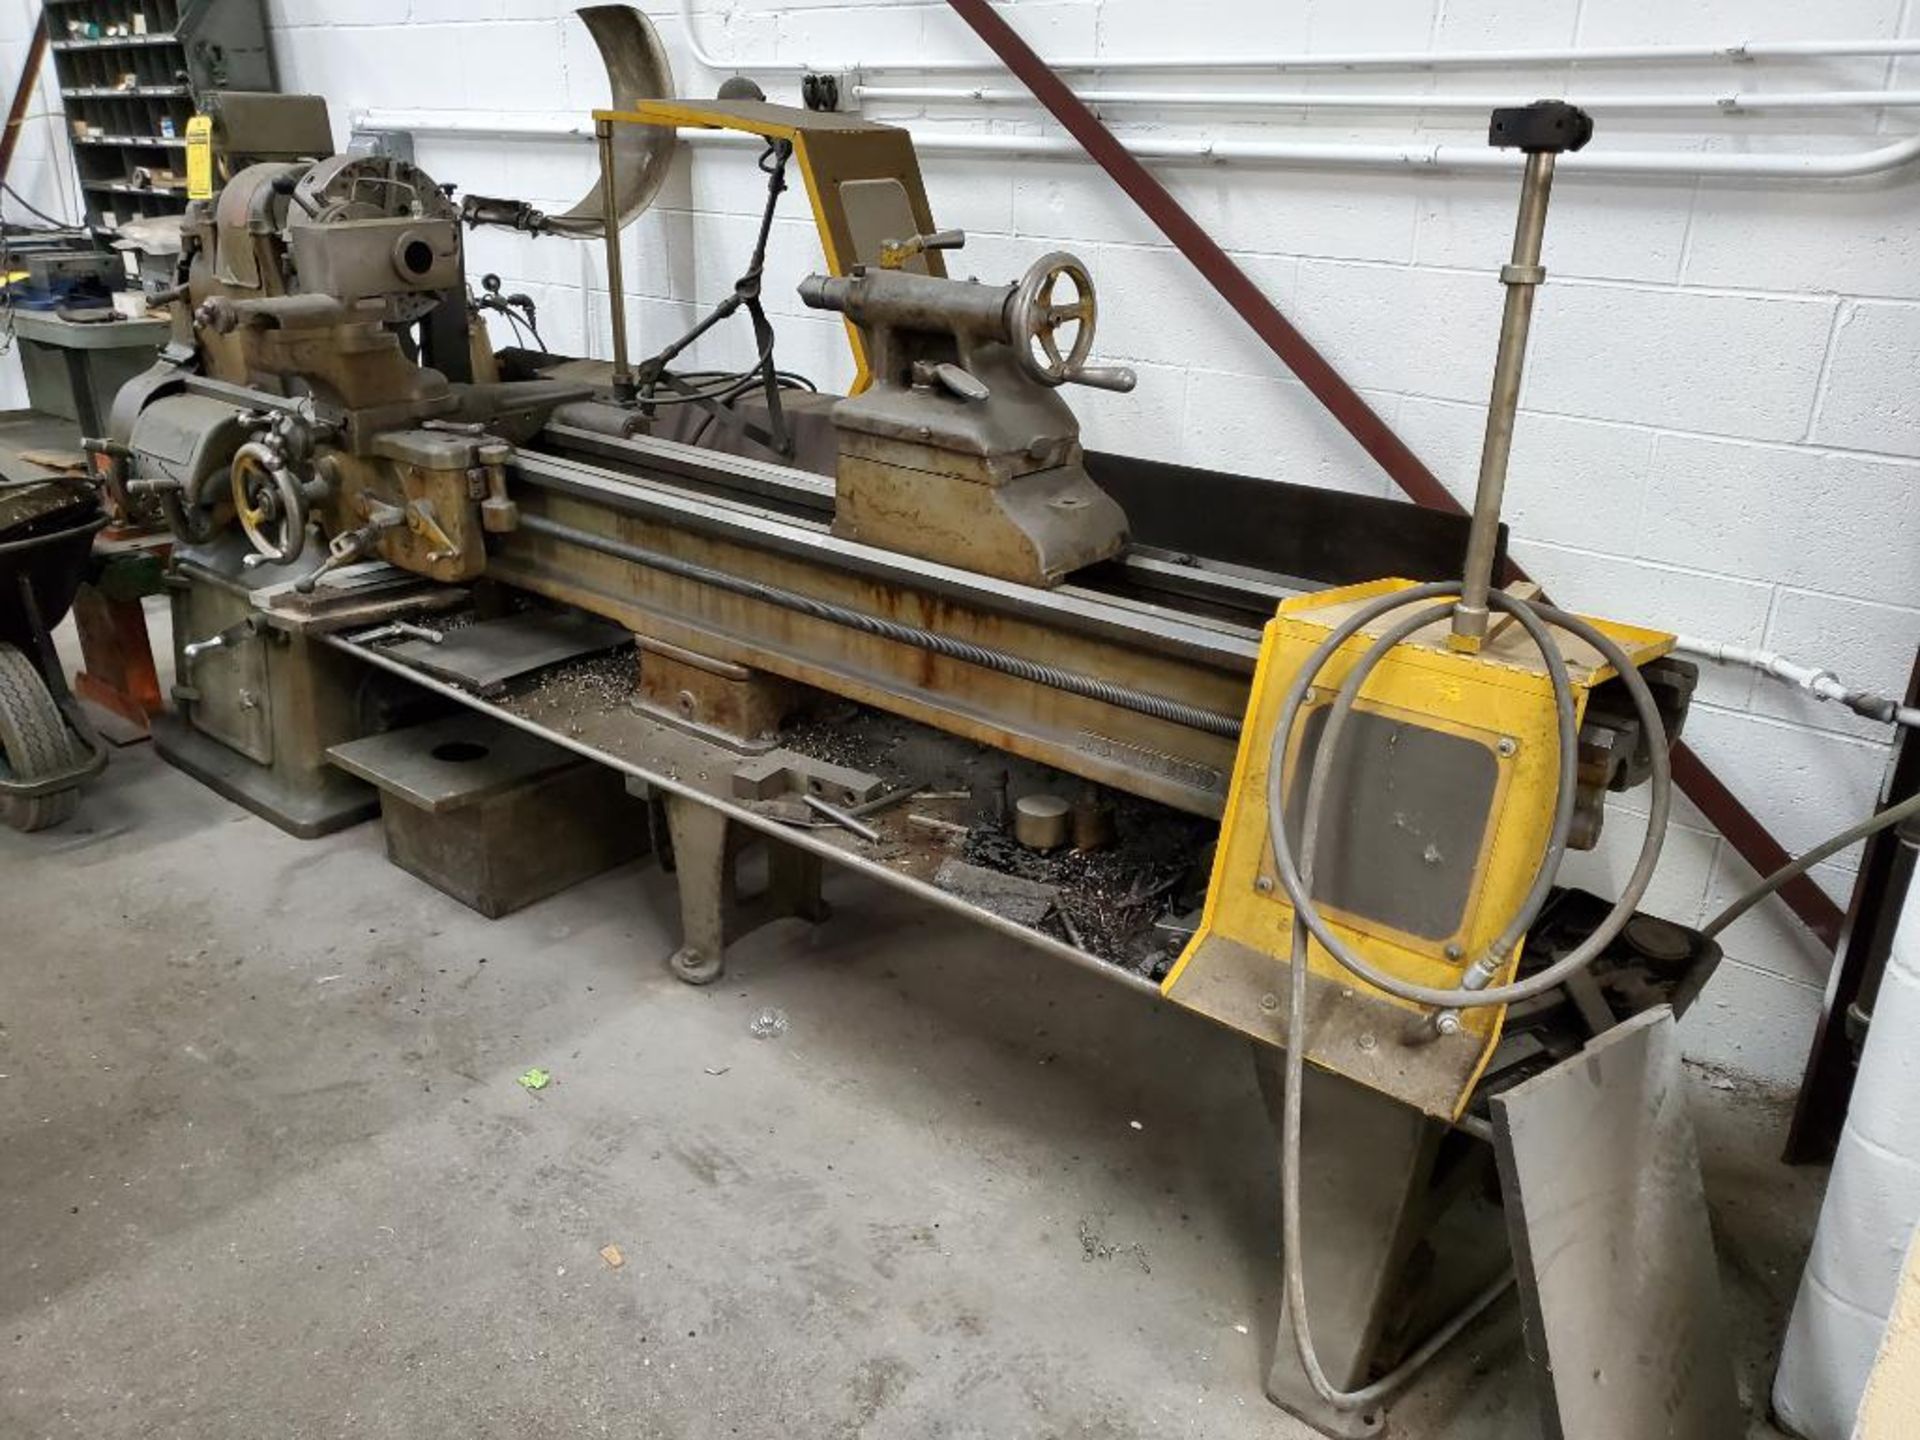 South Bend Horizontal Engine Lathe, 8' Gap Bed, 12" 3-Jaw Chuck, Tailstock, Cross Slide, Toolpost w/ - Image 3 of 11